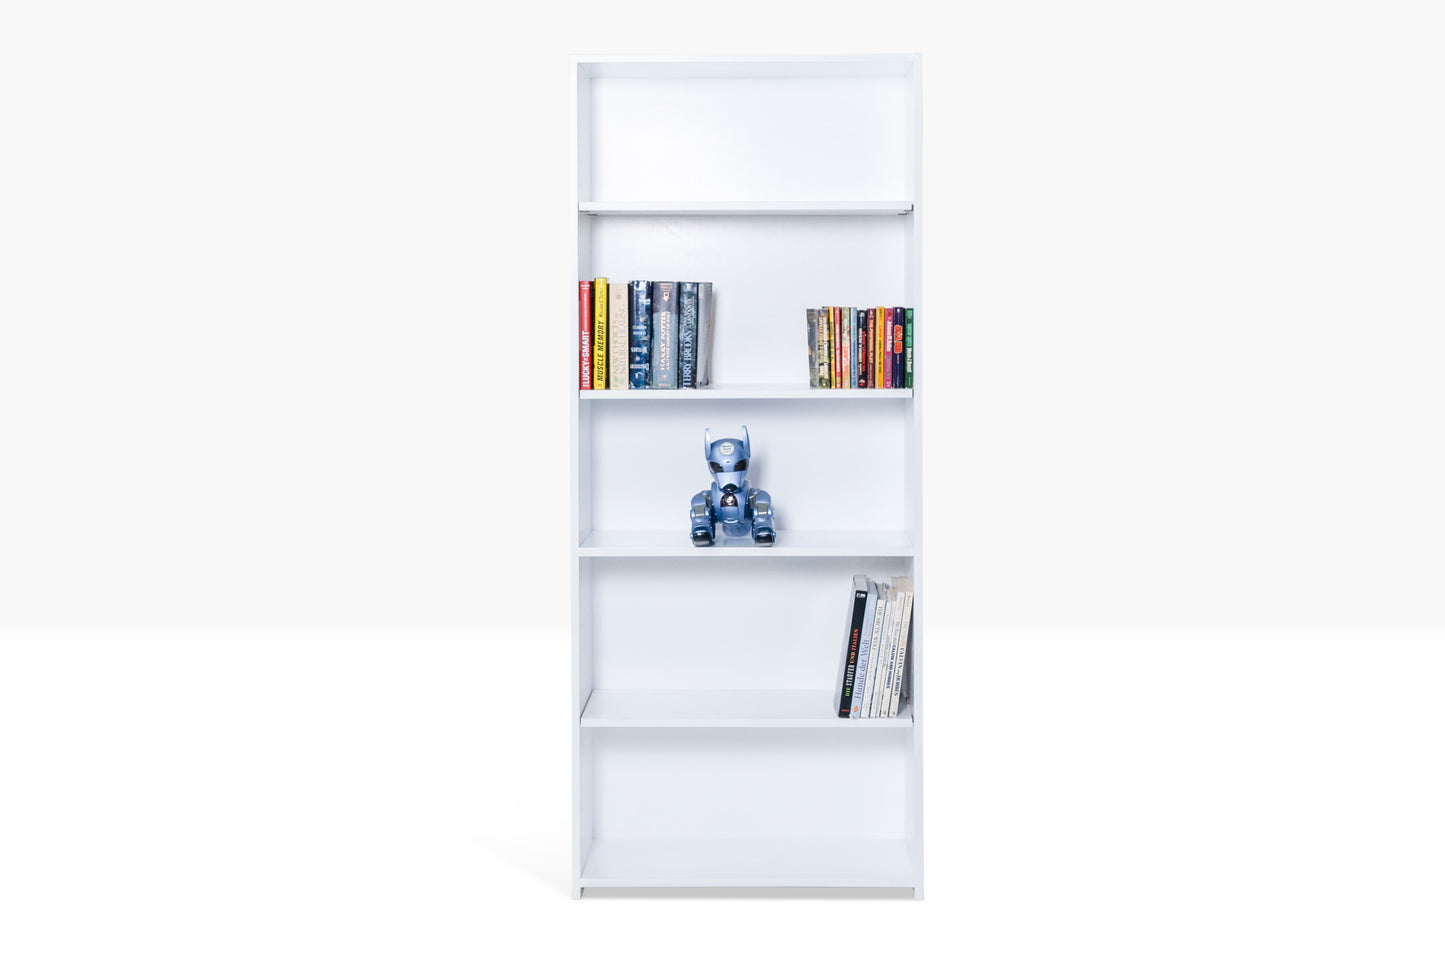 Berkshire Traditional Bookcase features adjustable shelving and birch construction. Shown in Bright White finish.